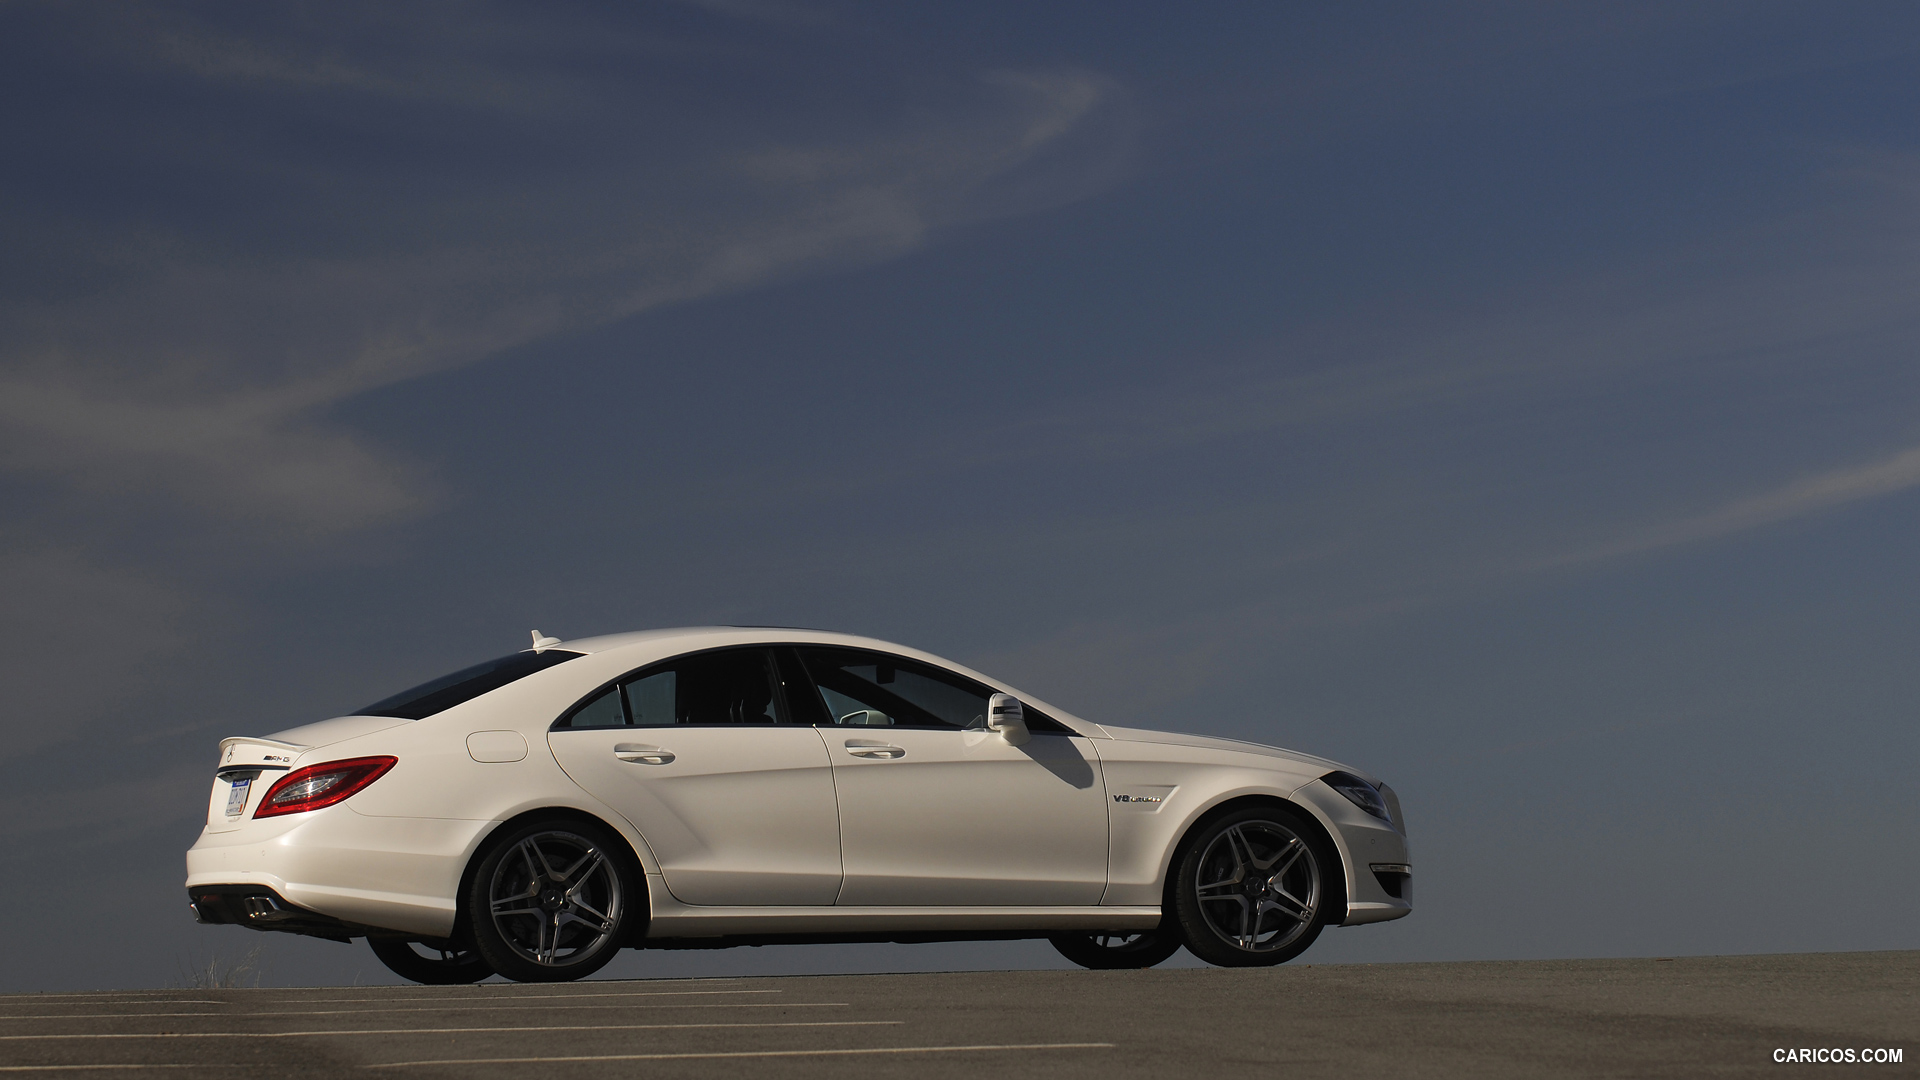 Mercedes-Benz CLS63 AMG (2012) US-Version - Diamond White - Side, #21 of 100